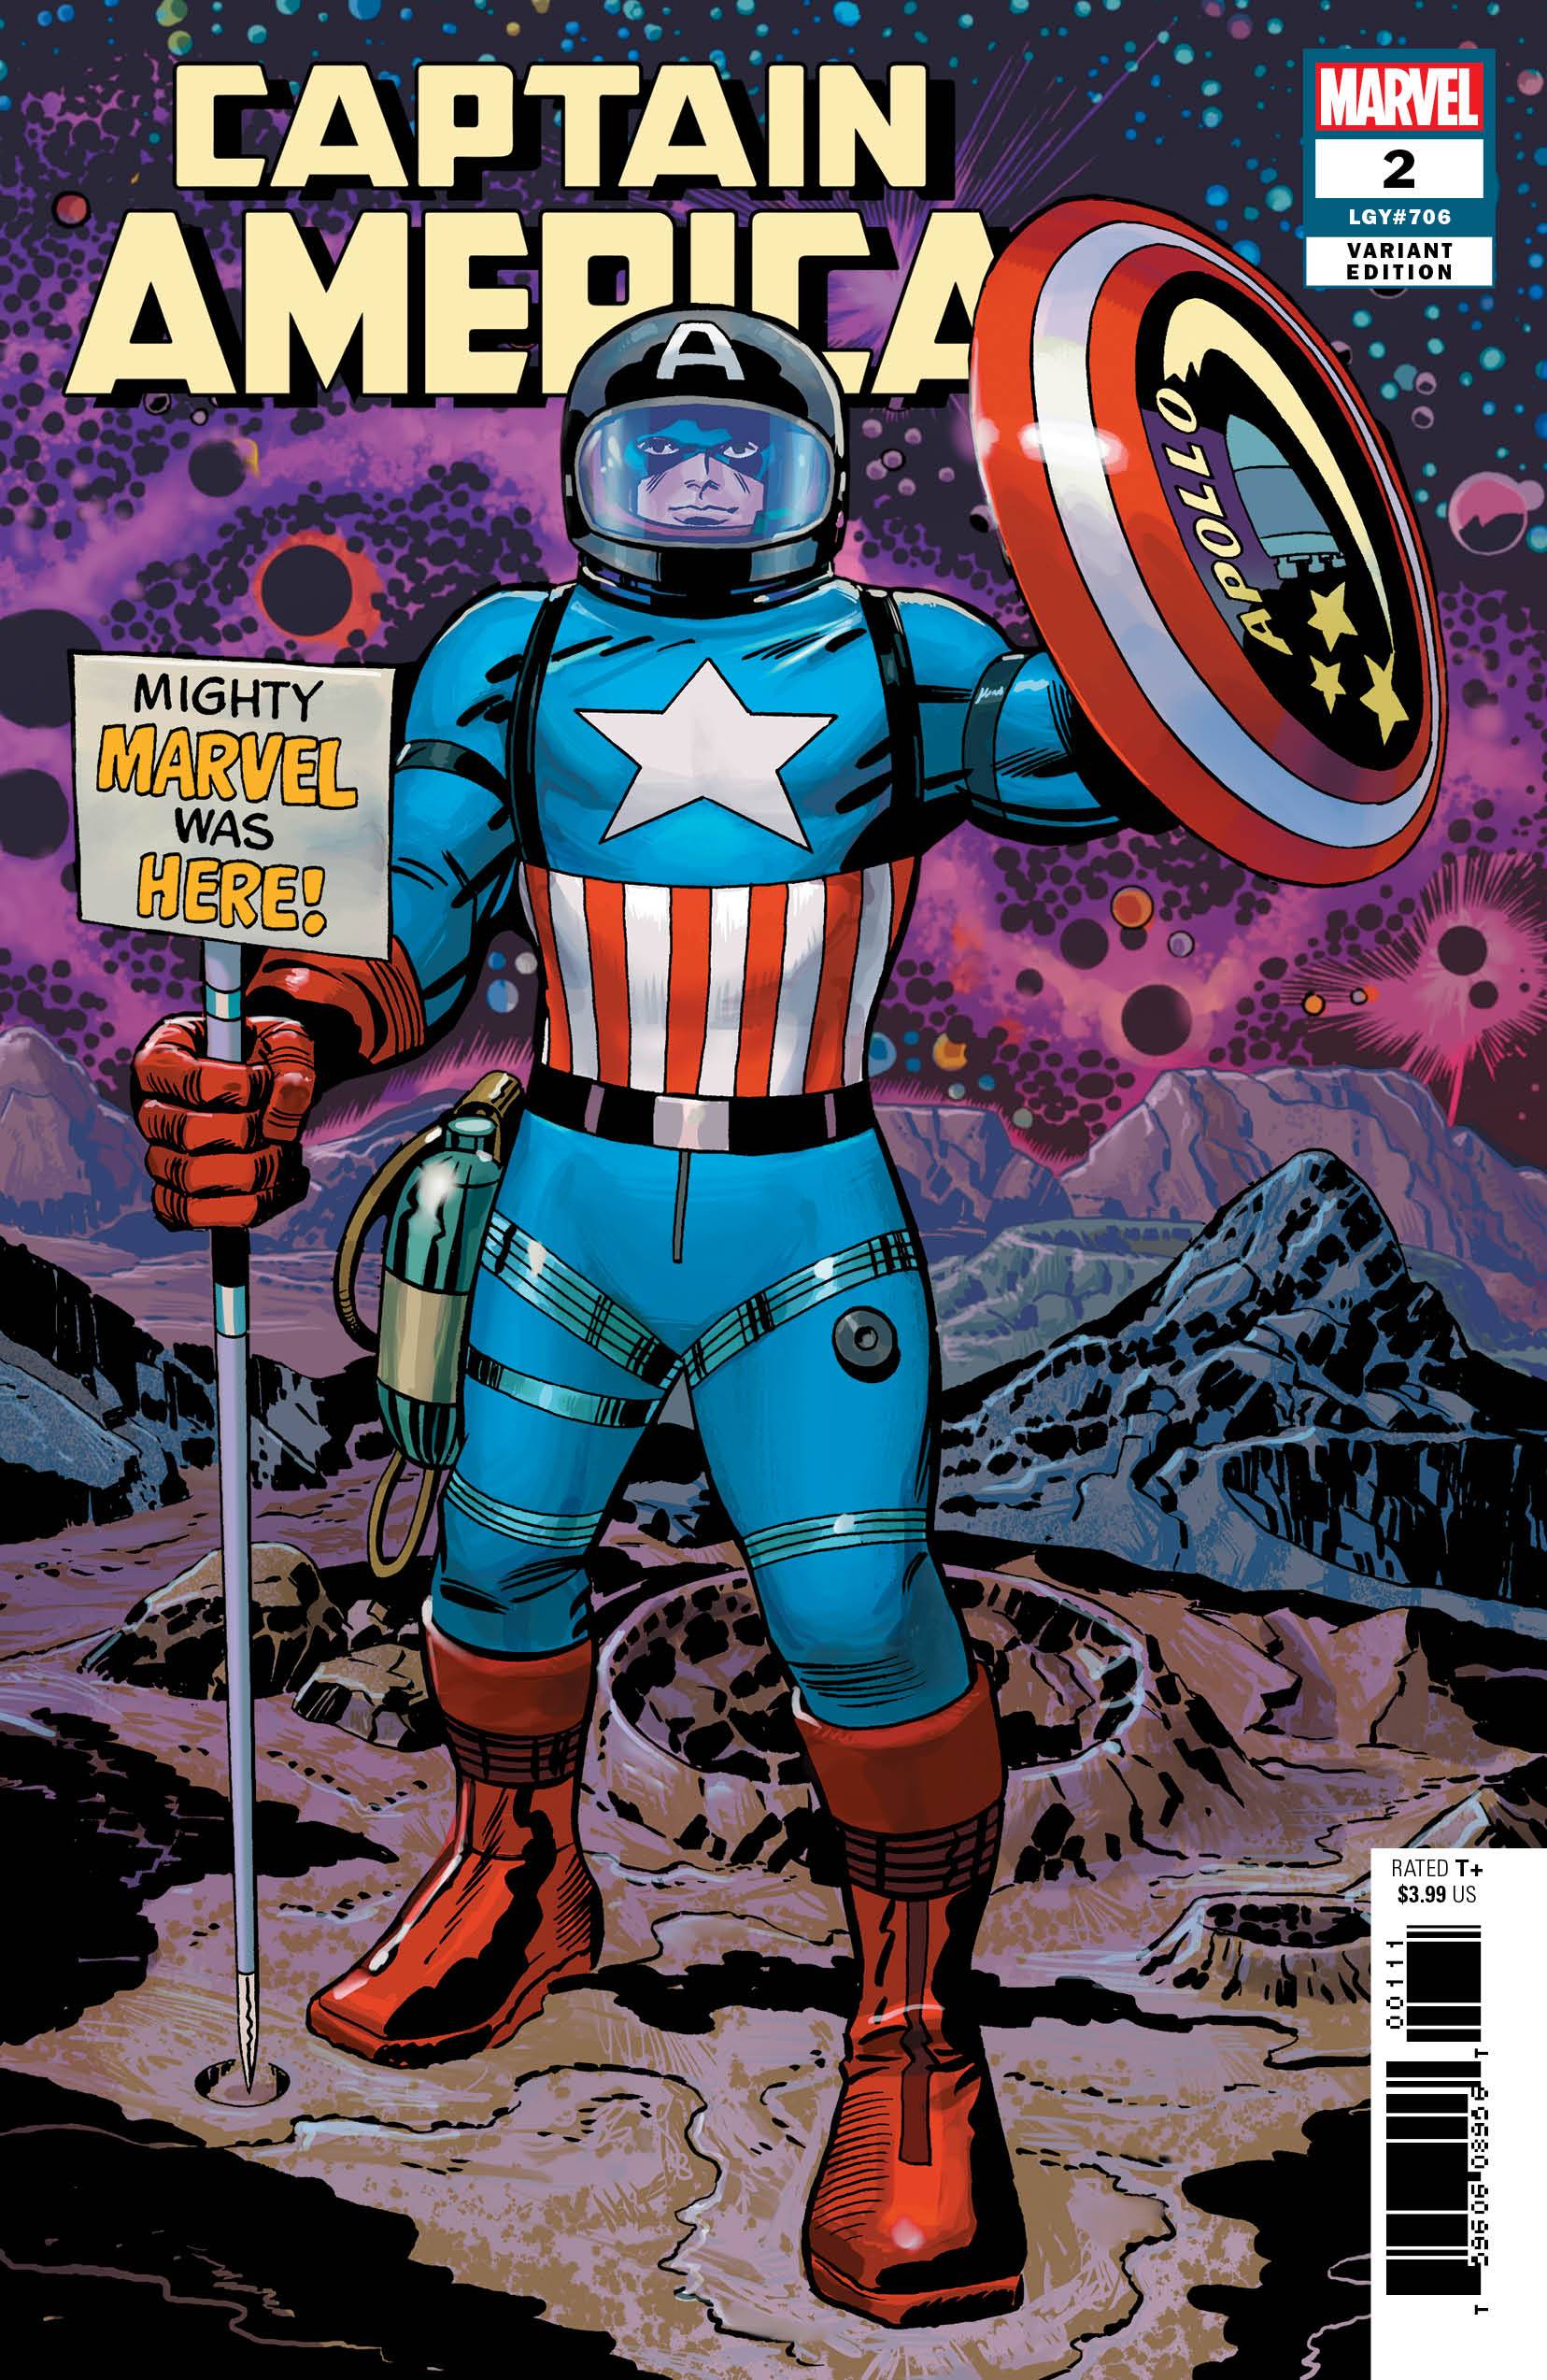 CAPTAIN AMERICA #2 KIRBY REMASTERED VARIANT FOC 07/09